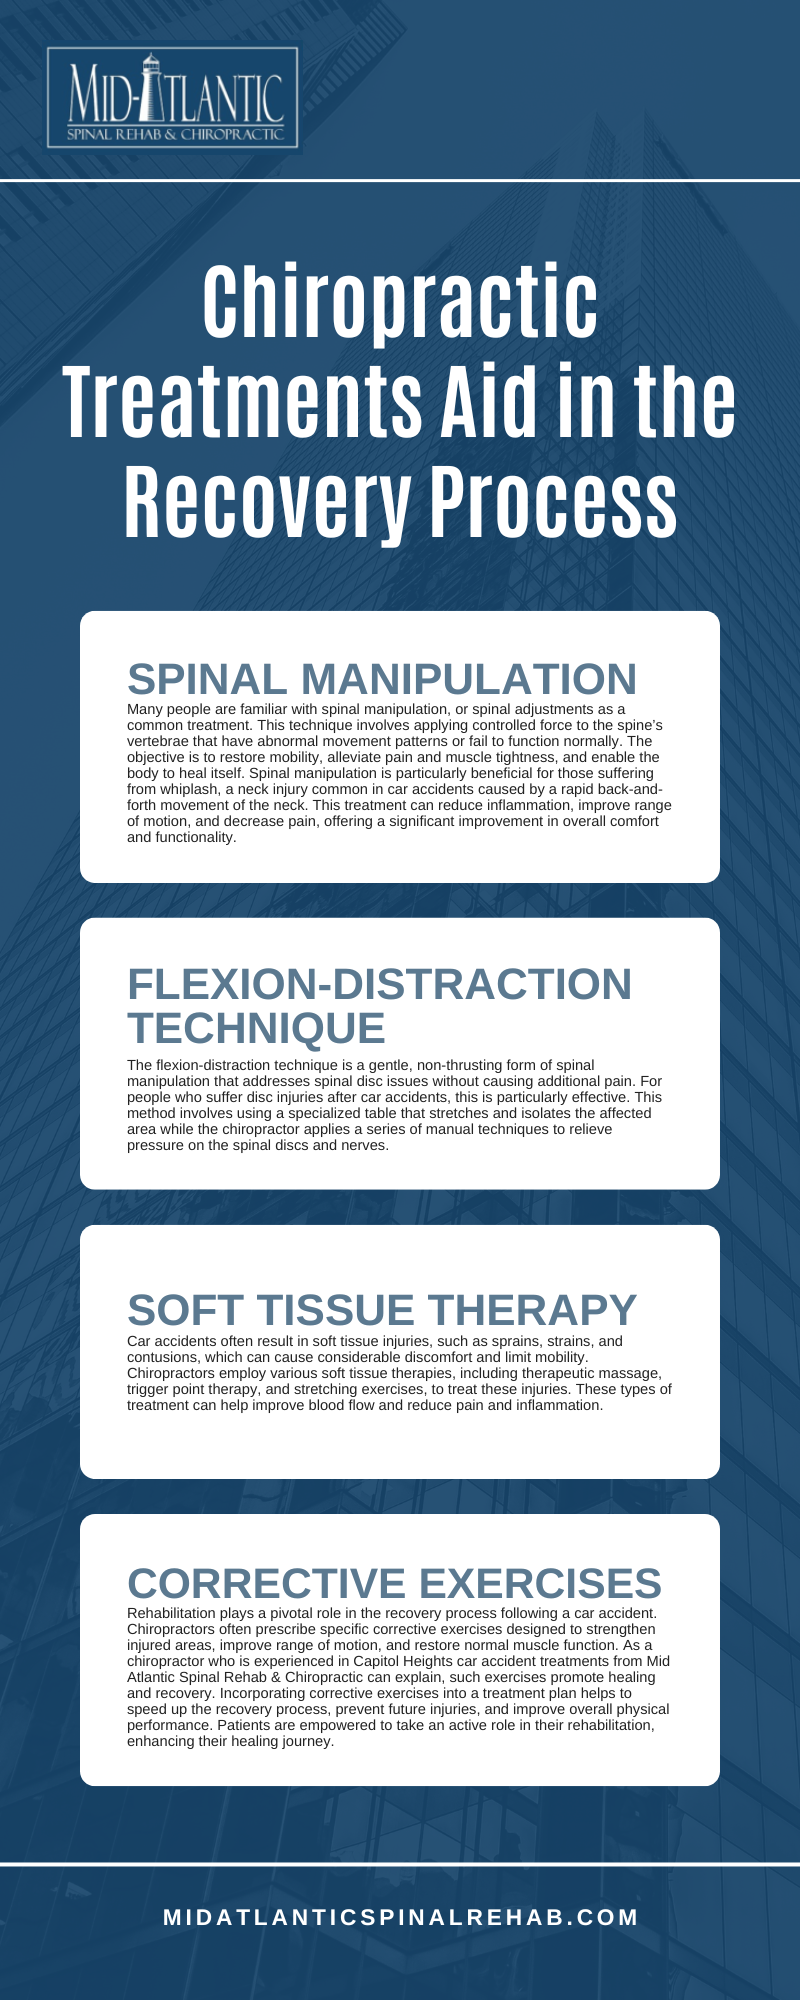 Chiropractic Treatments Aid in The Recovery Process Infographic